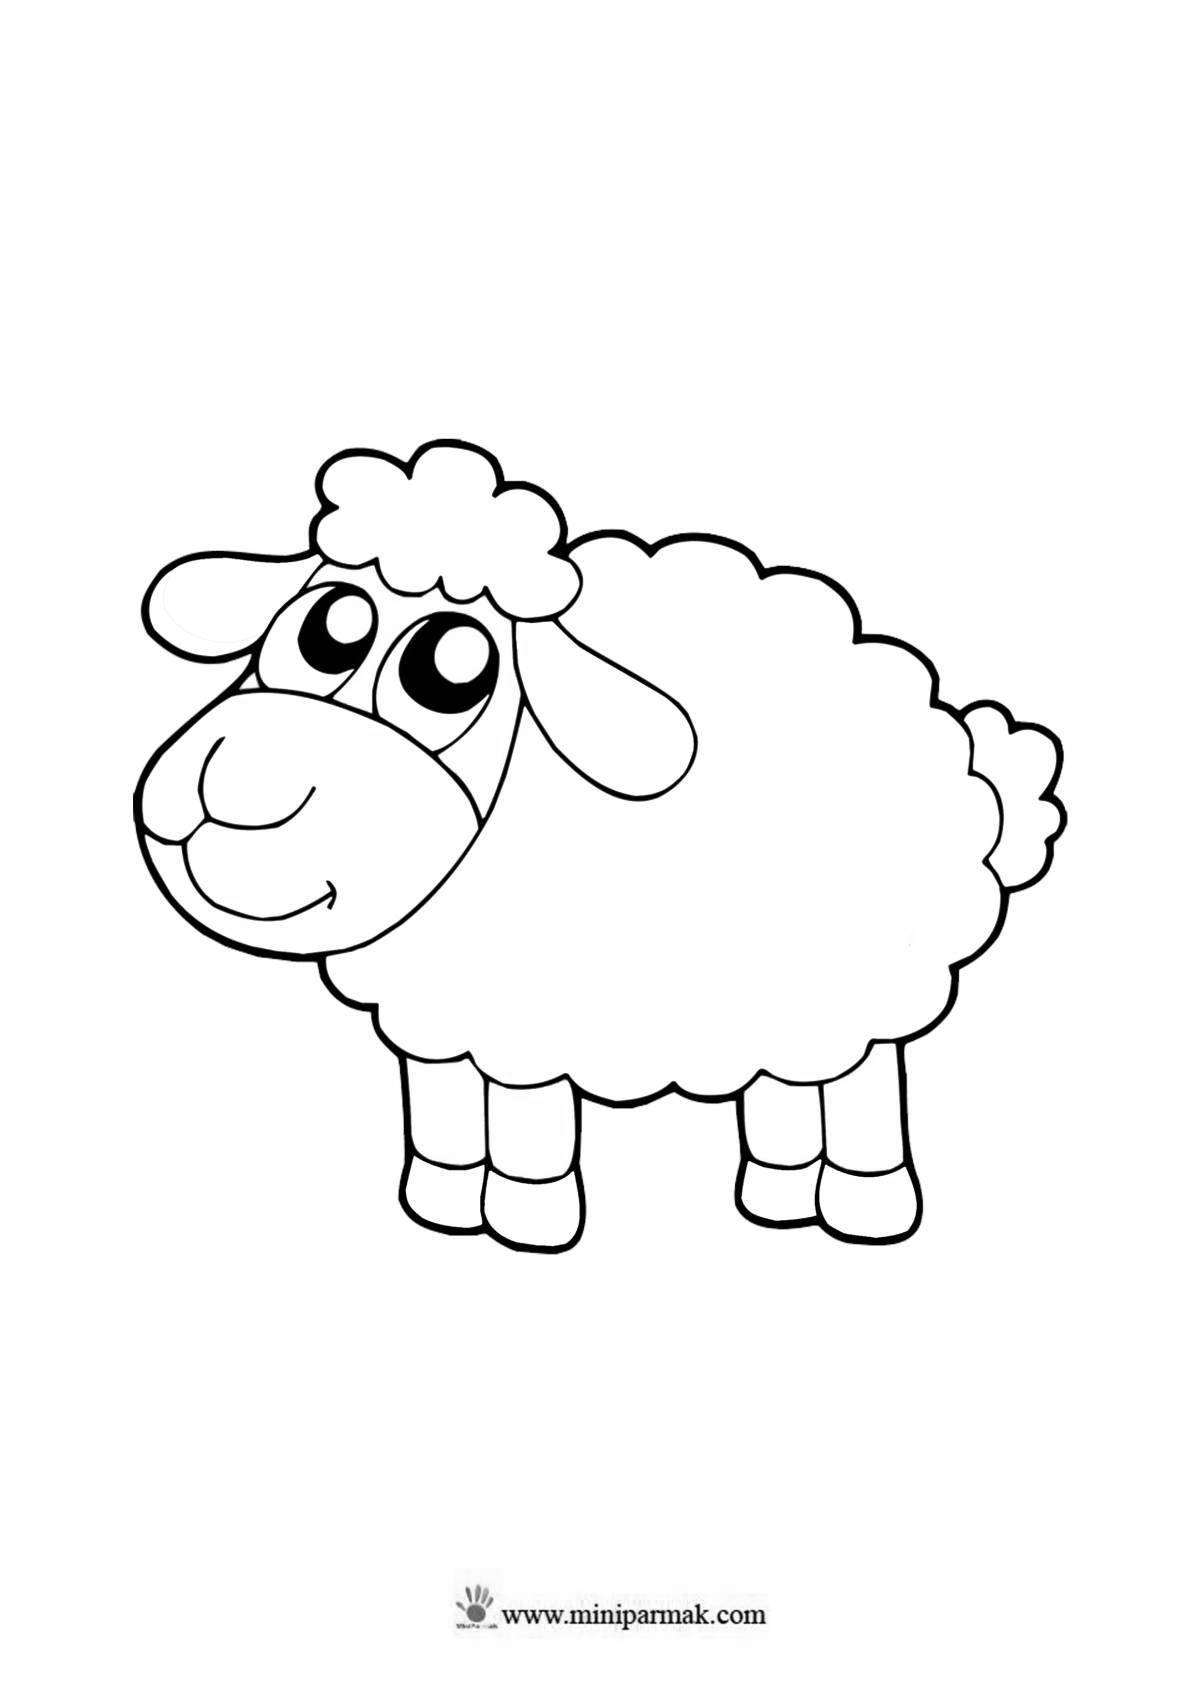 Coloring book happy sheep for children 4-5 years old